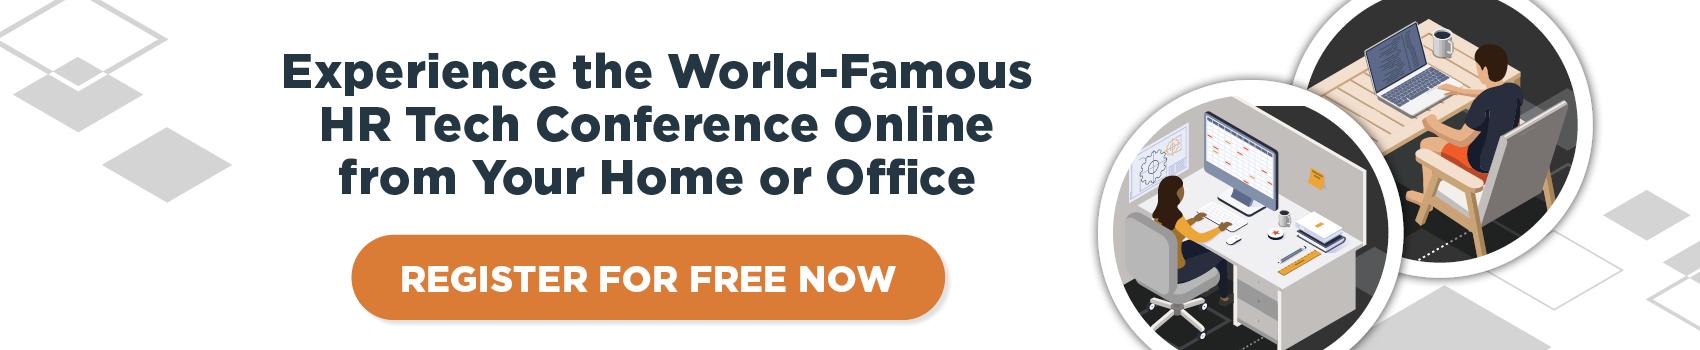 Experience the World-Famous HR Tech Conference Online from Your Home or Office REGISTER FOR FREE NOW